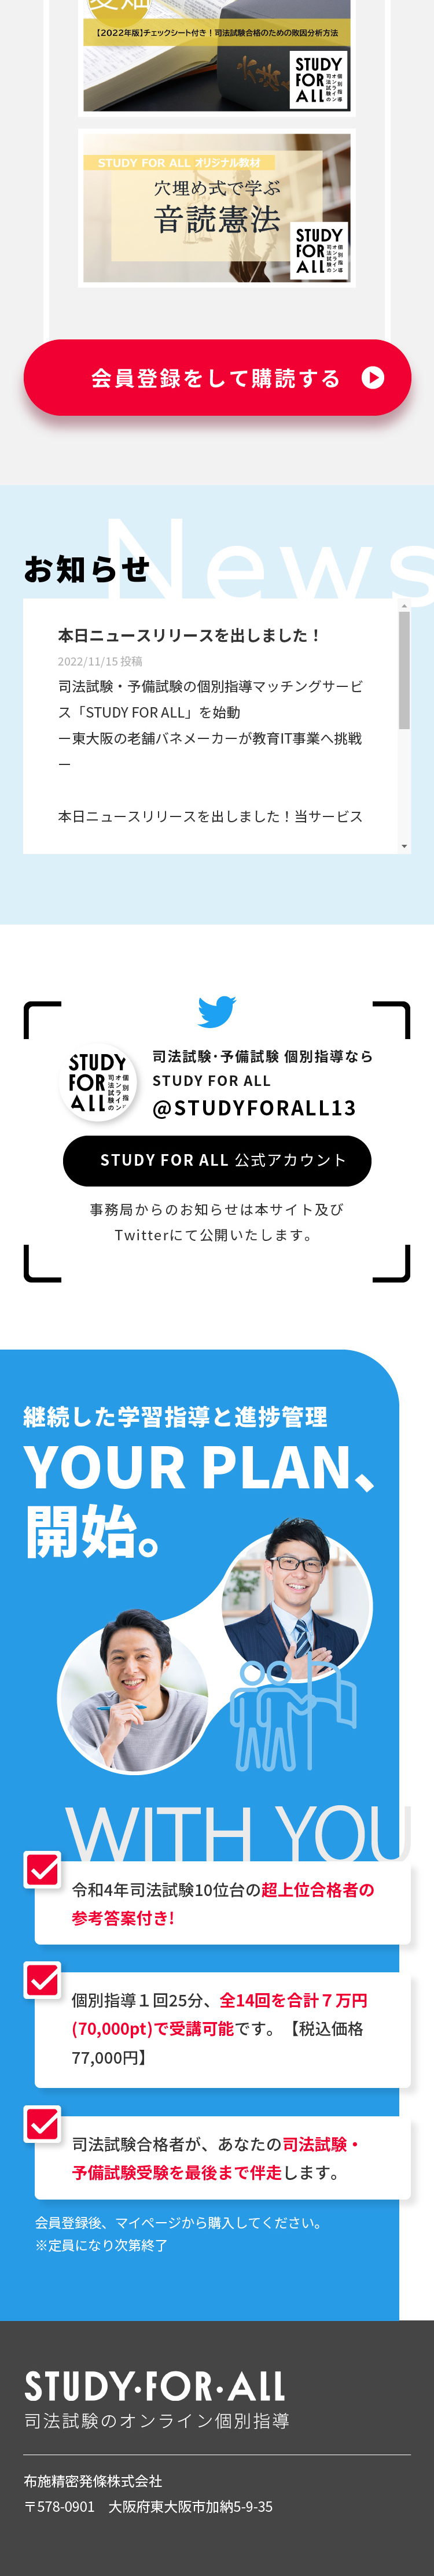 STUDY-FOR-ALL_sp_2